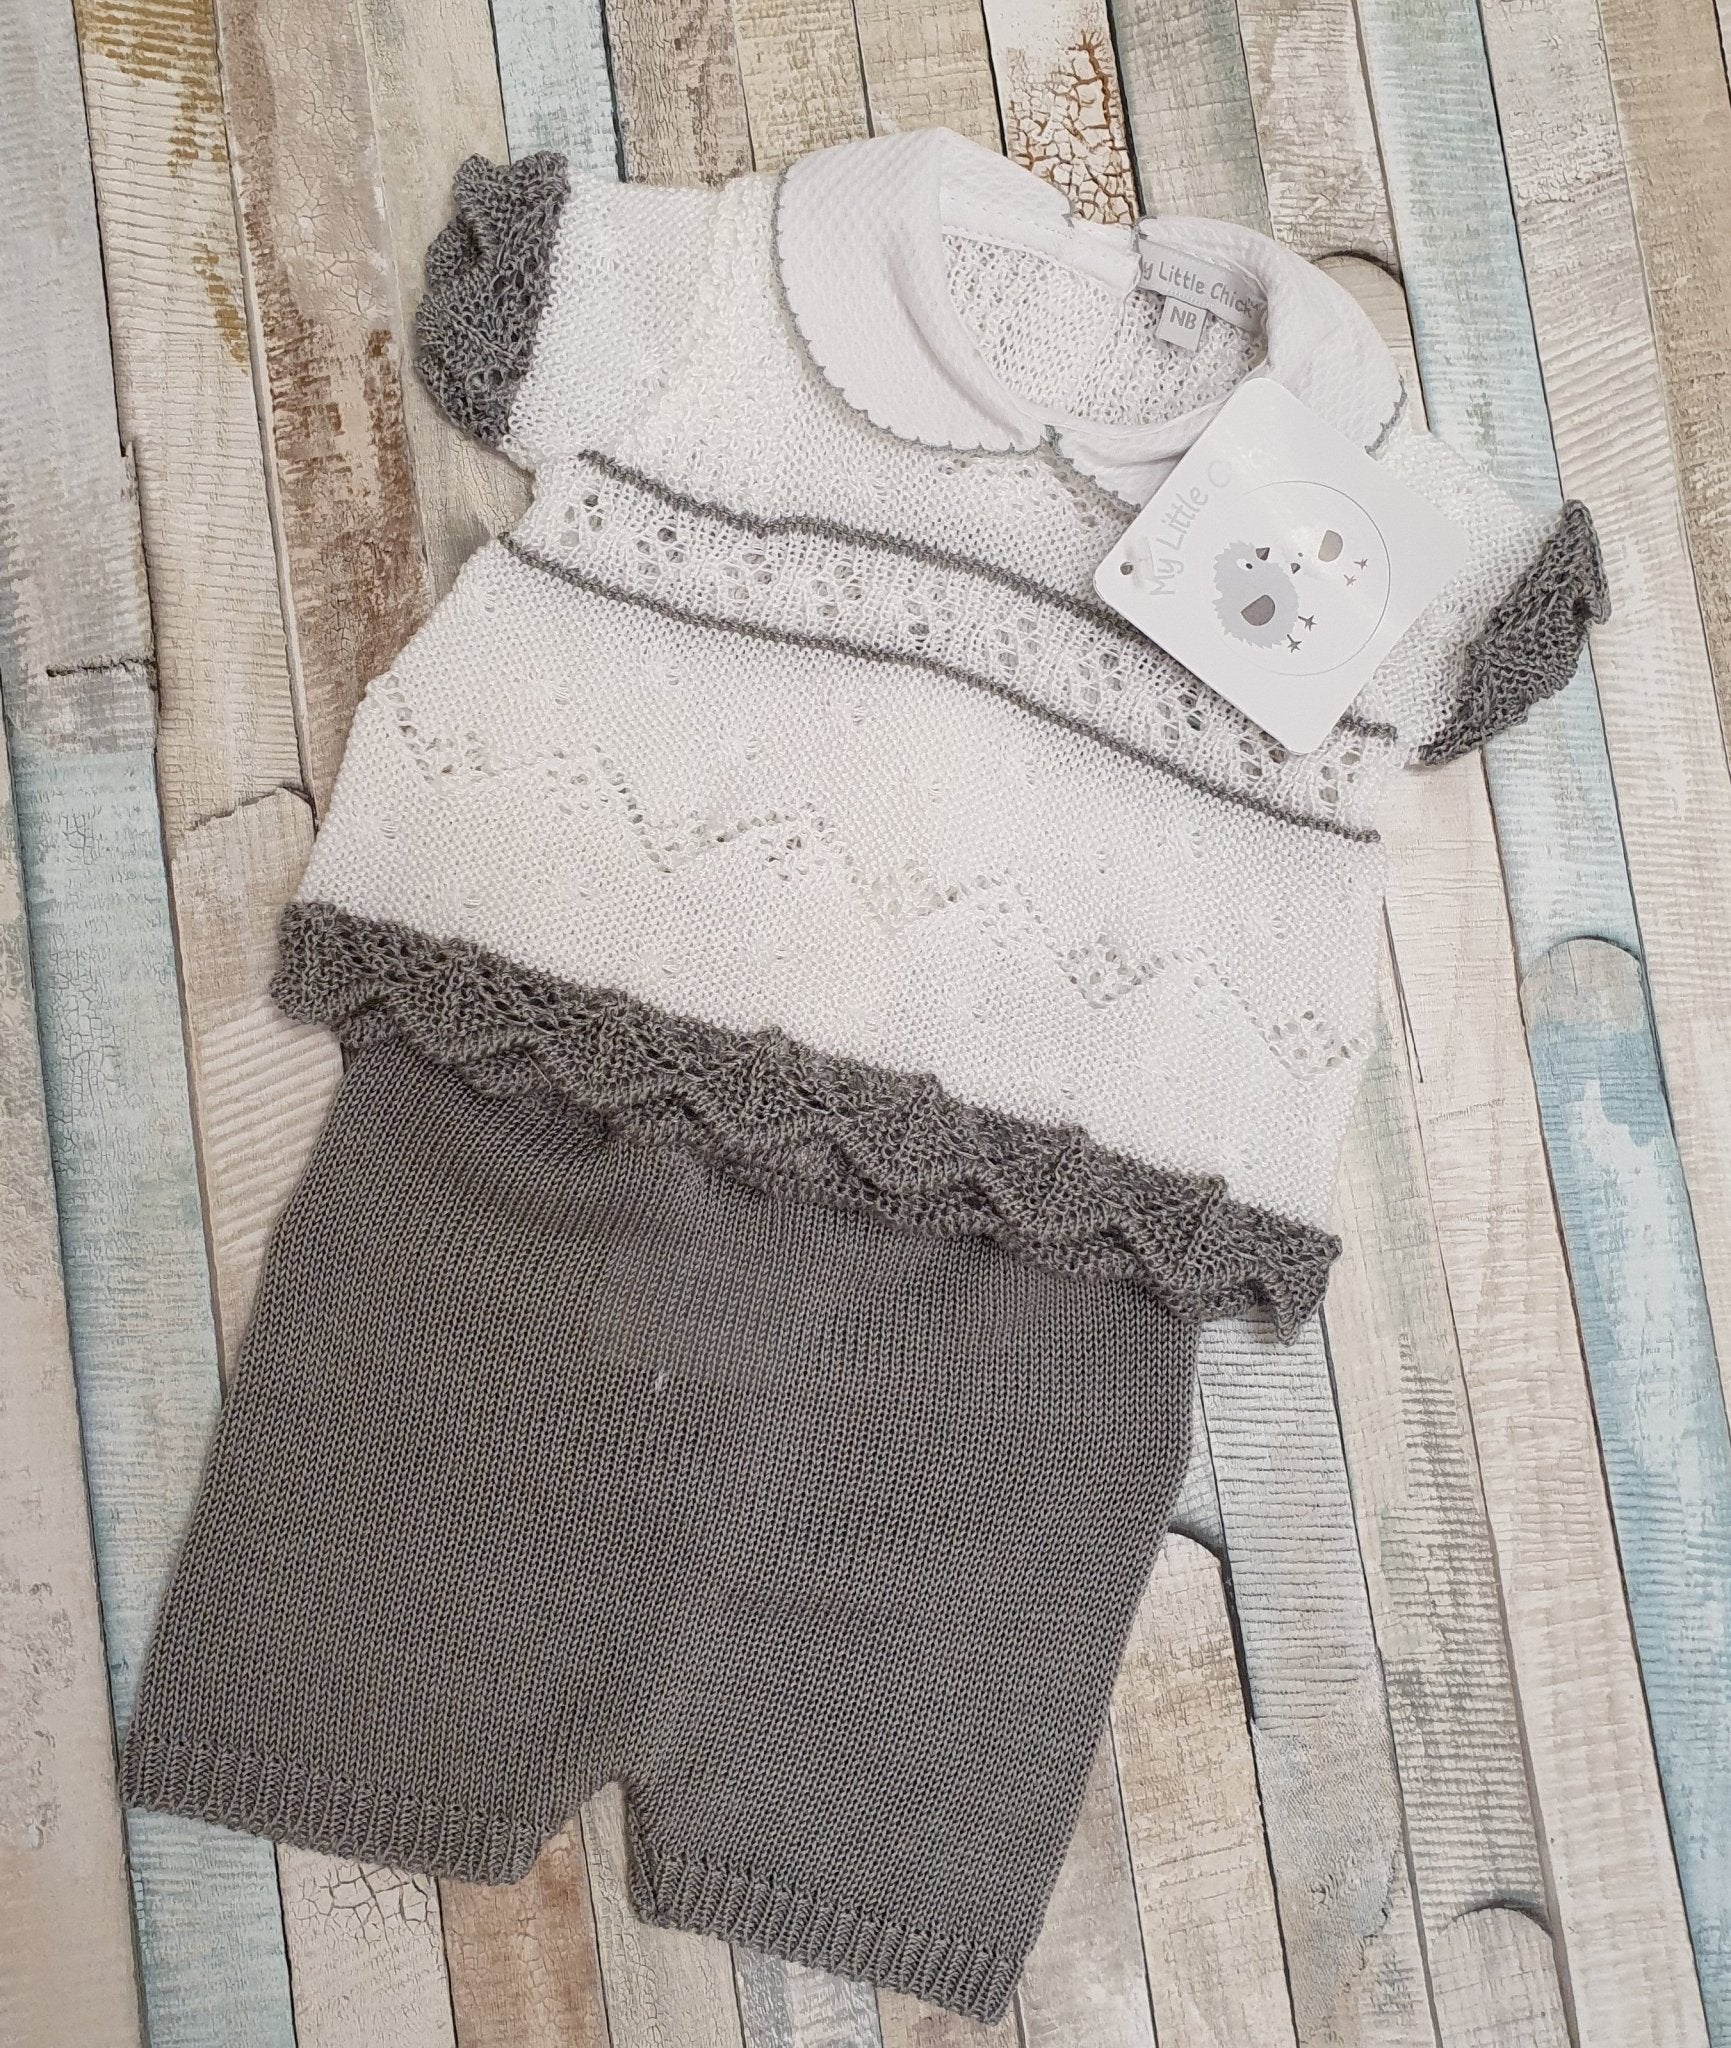 Unisex Baby Grey & White Lace Knitted Short et - Nana B Baby & Childrenswear Boutique